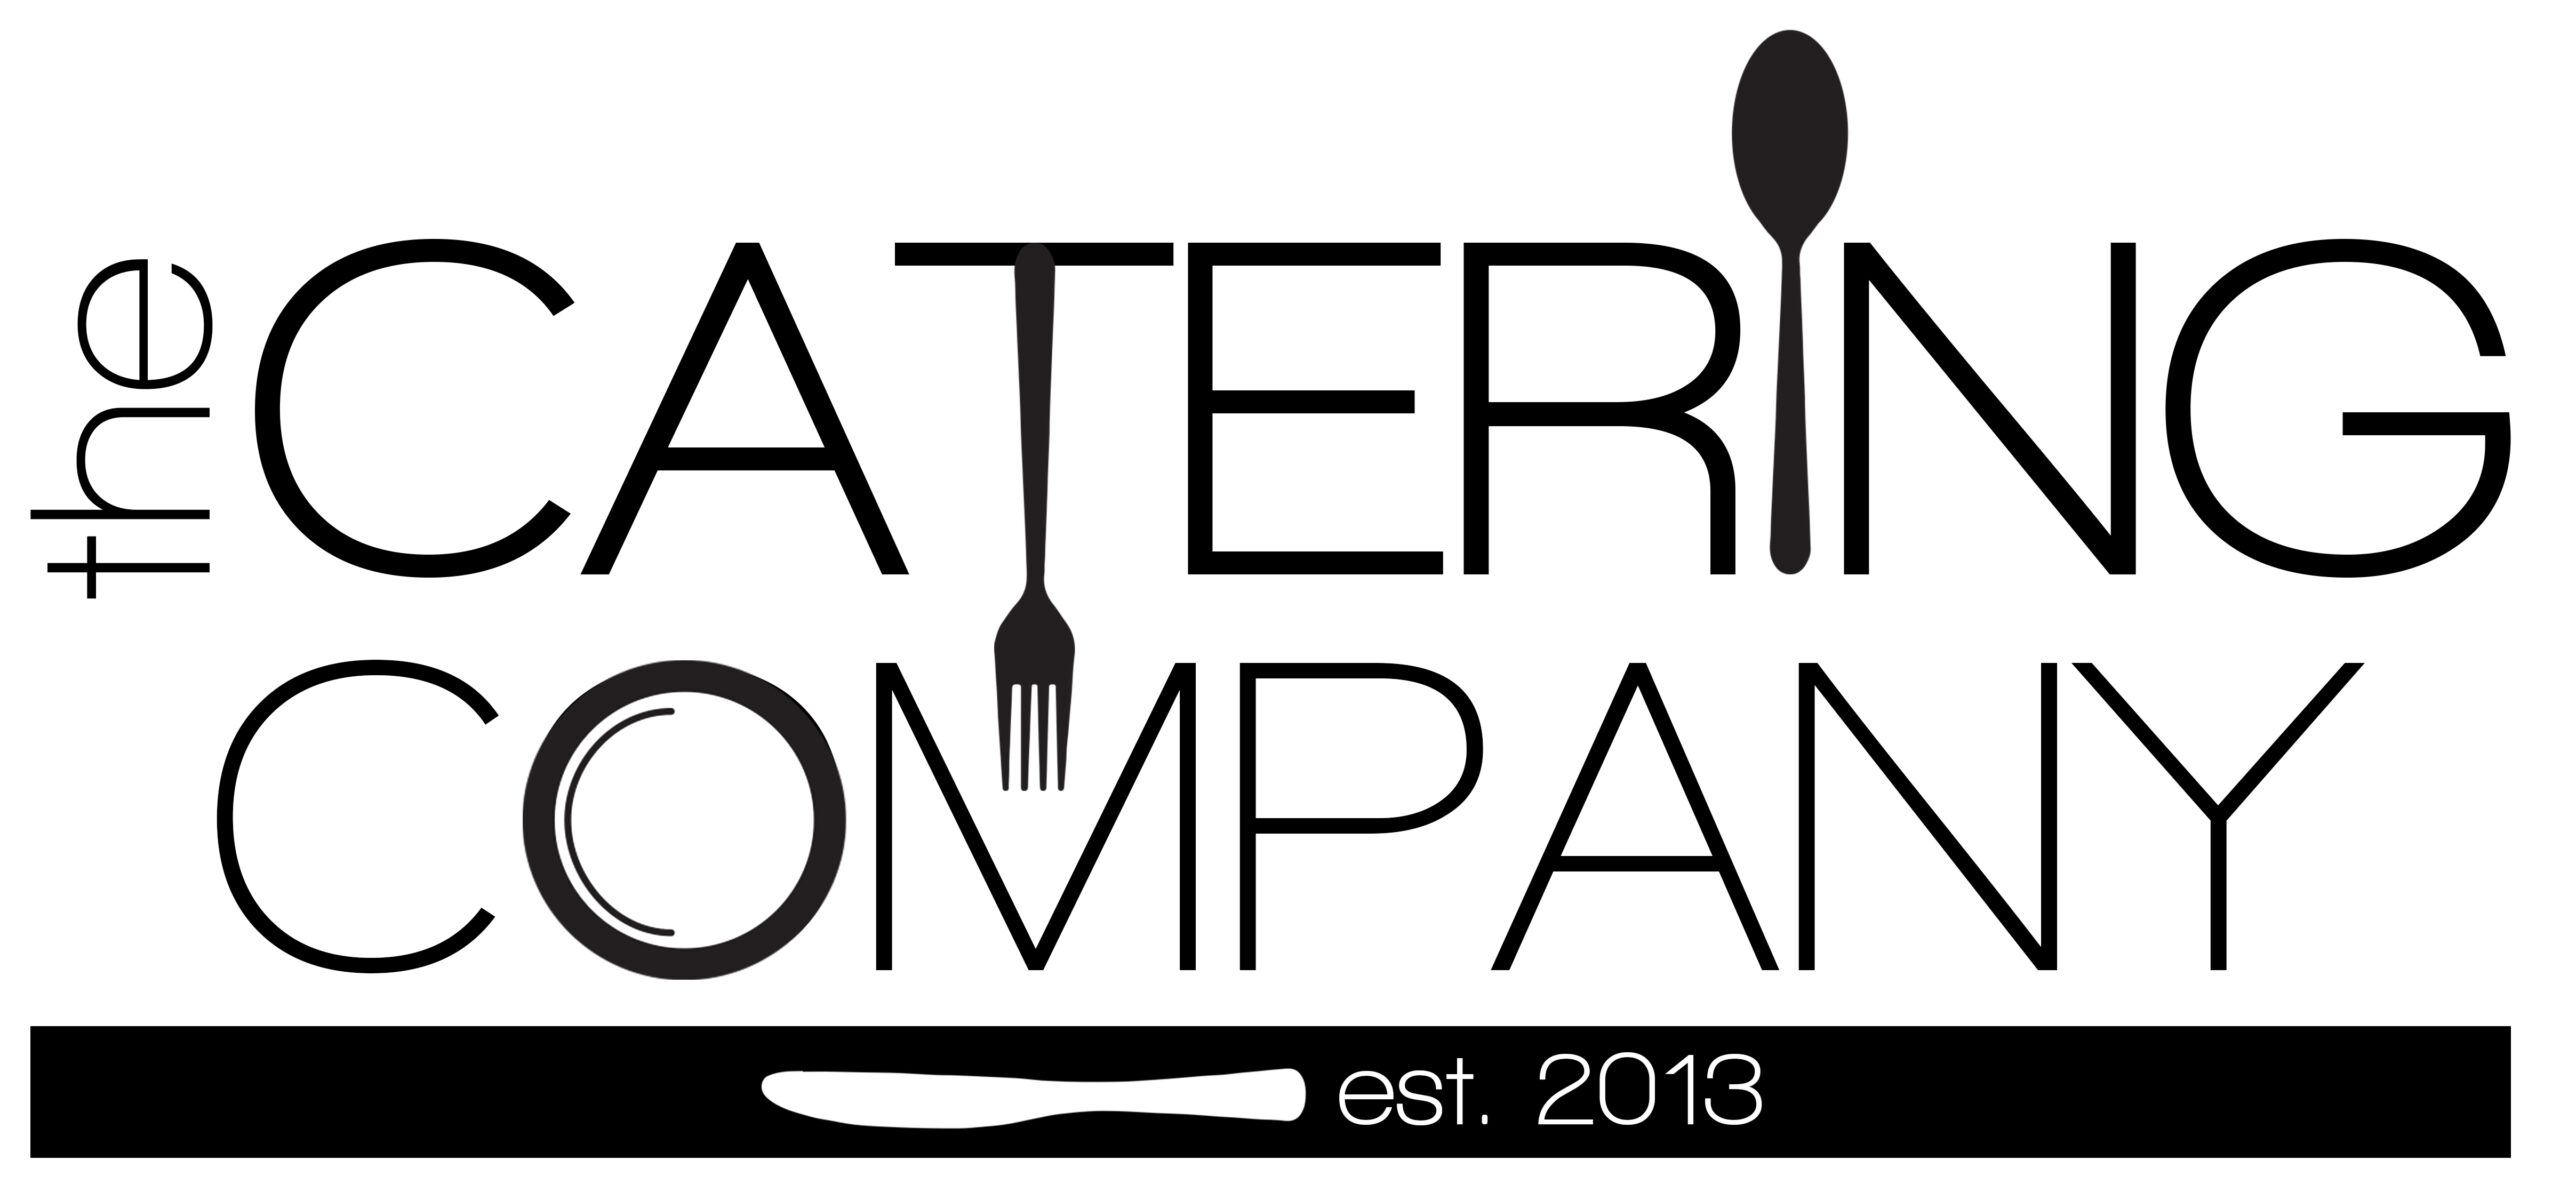 The Catering Company Established 2013 black and white logo